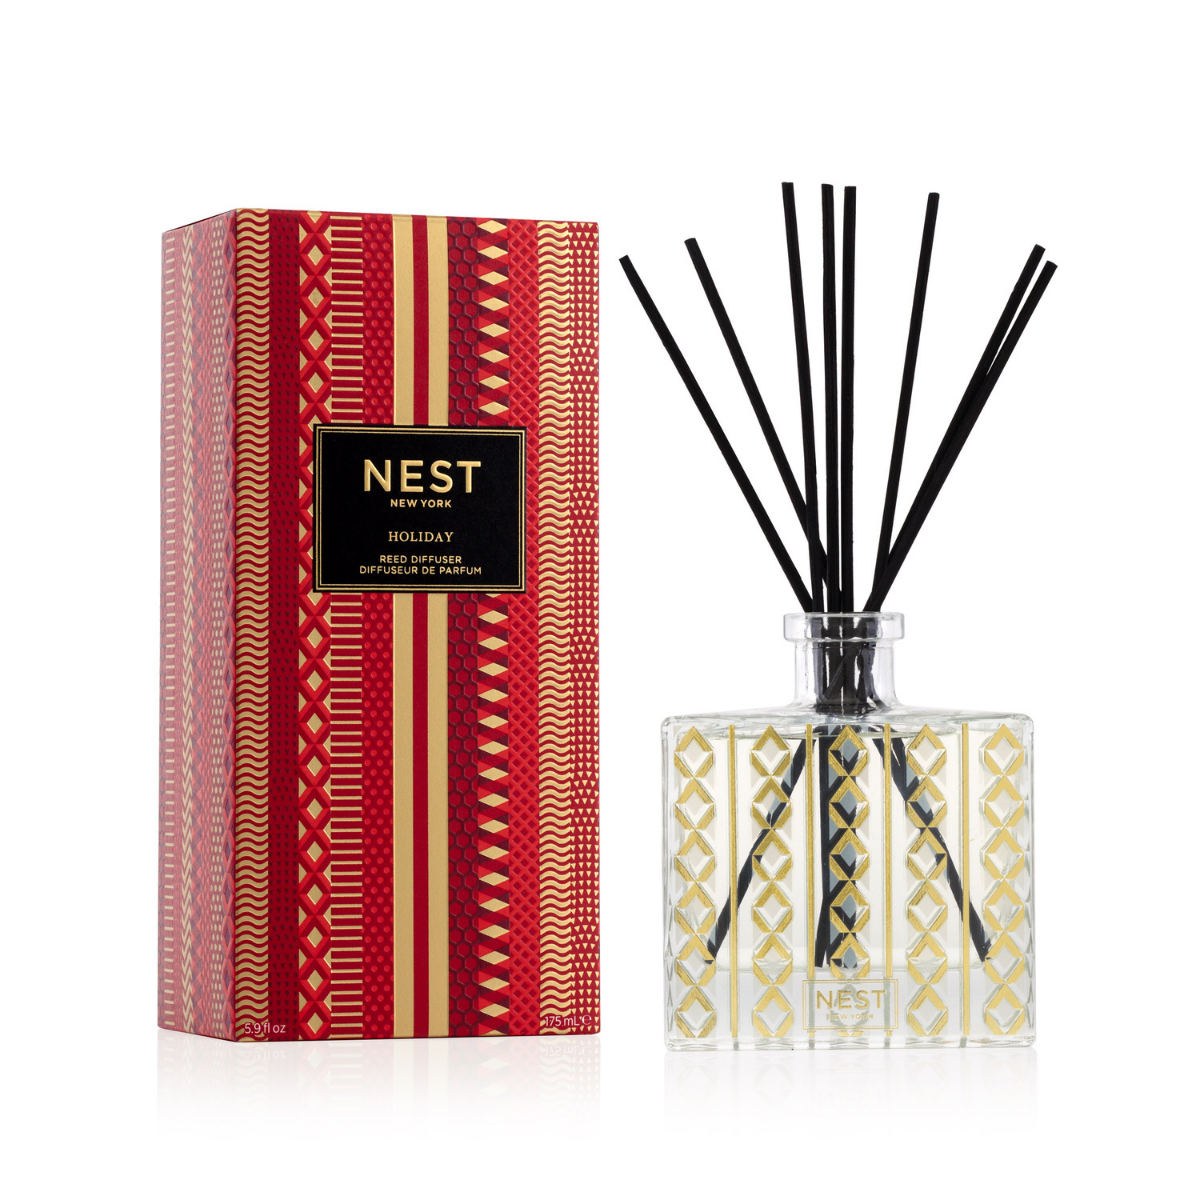 Primary image of Holiday Reed Diffuser